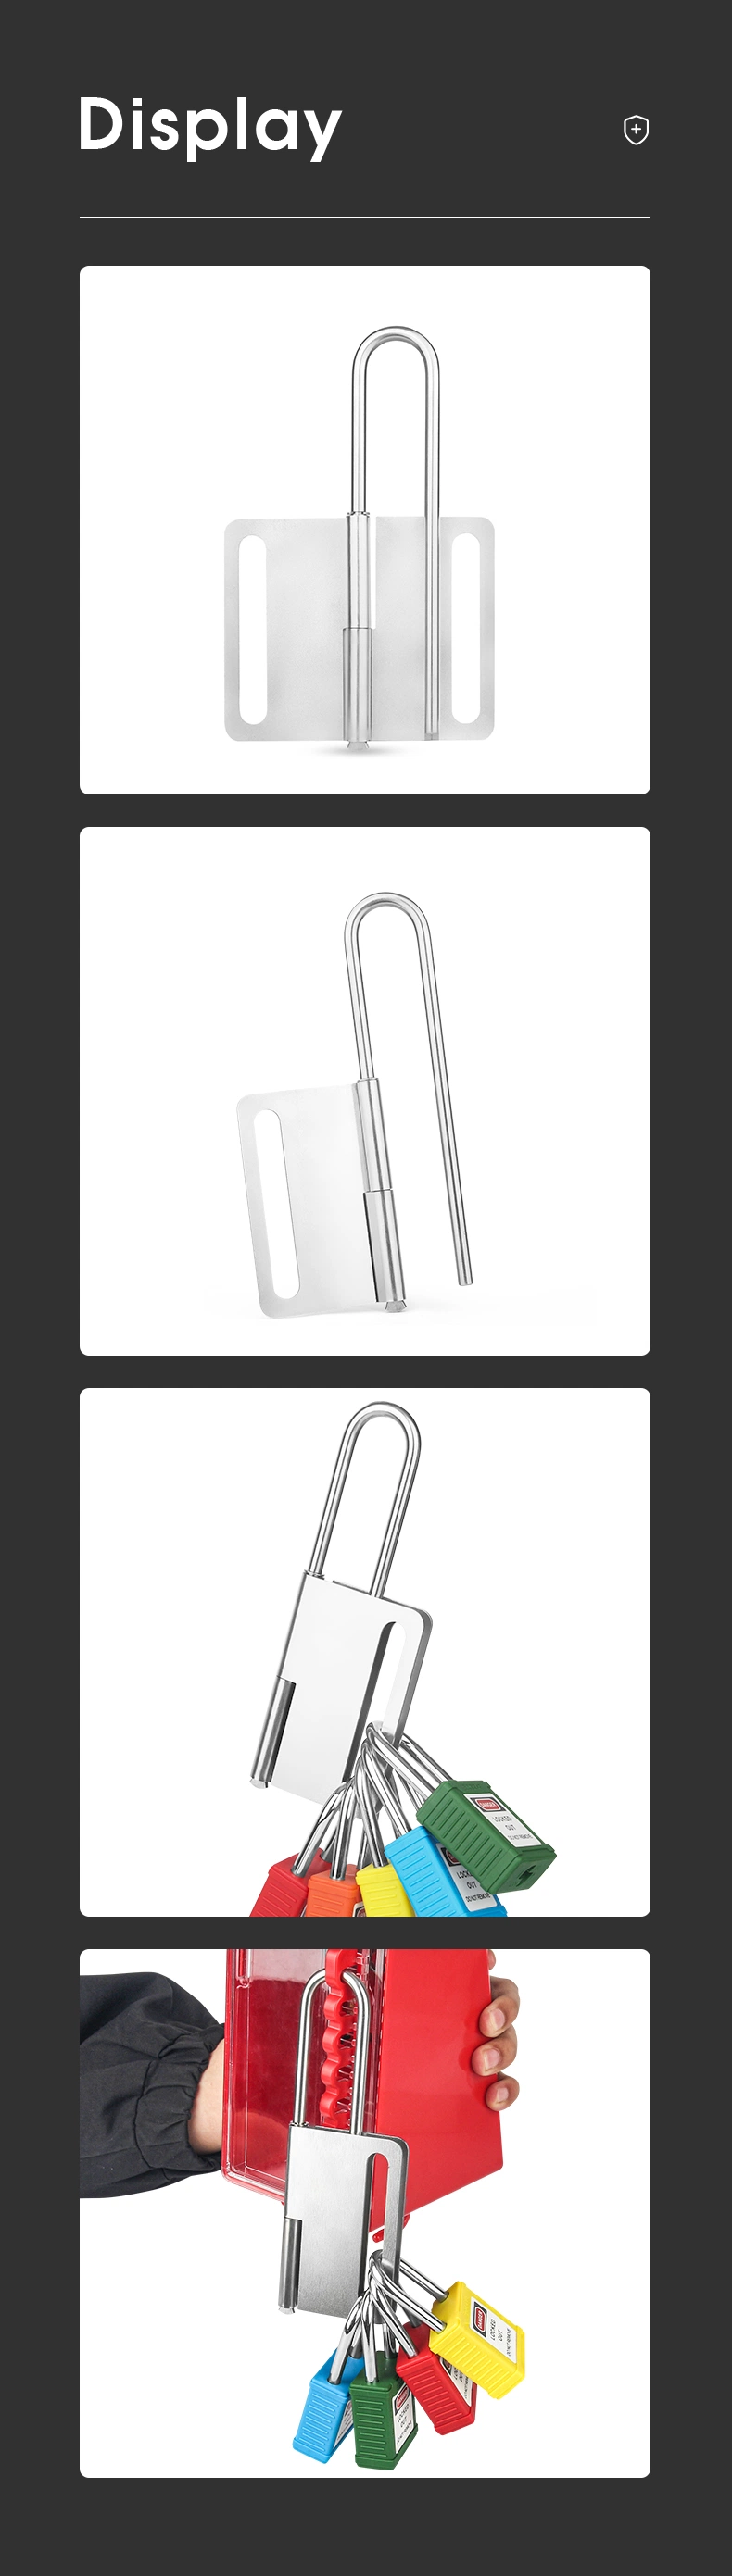 High Quality Silver Hardened Steel Safety Lockout Hasp That 69mm Shackle Height